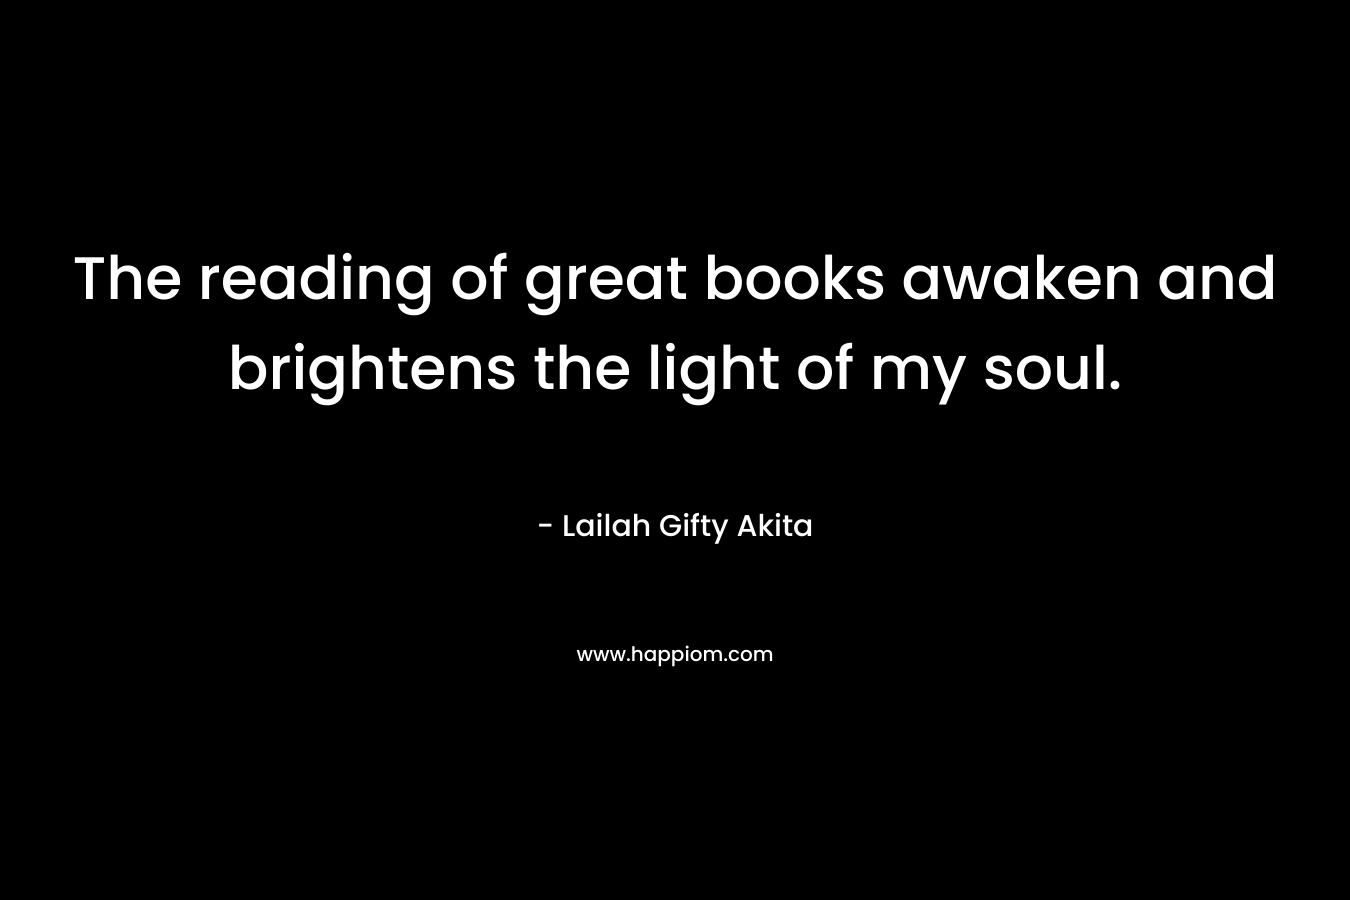 The reading of great books awaken and brightens the light of my soul.